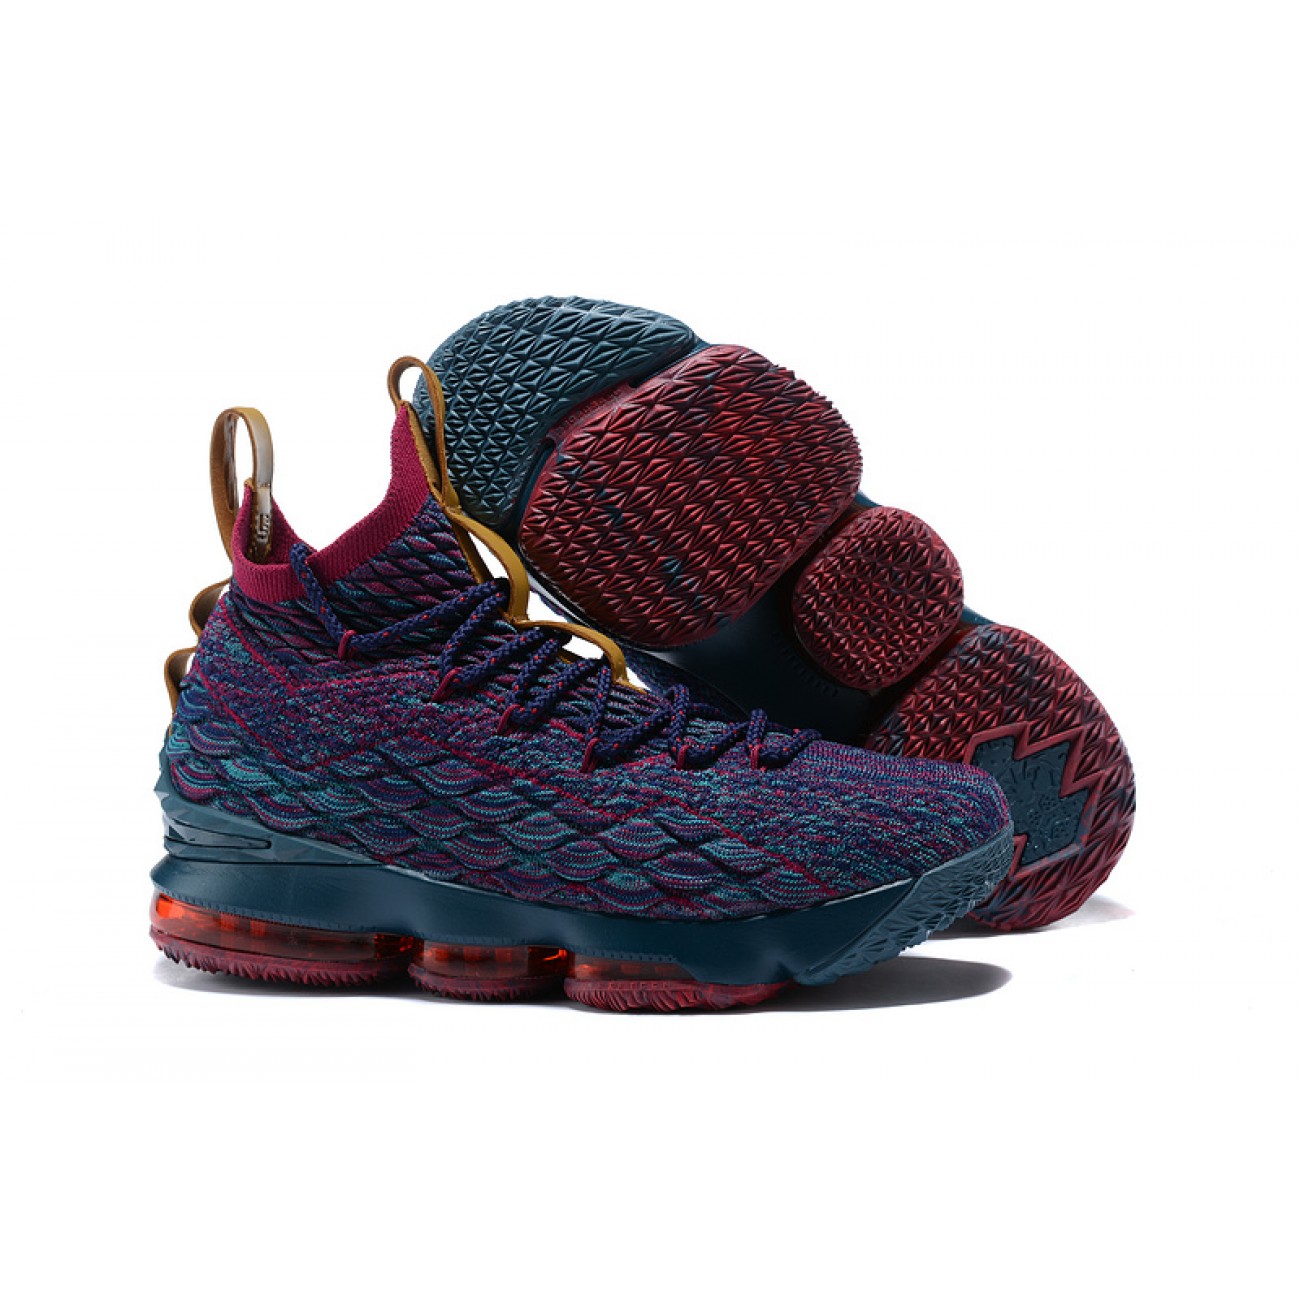 Lebron 15 "The Cavaliers" Red/Deep Blue